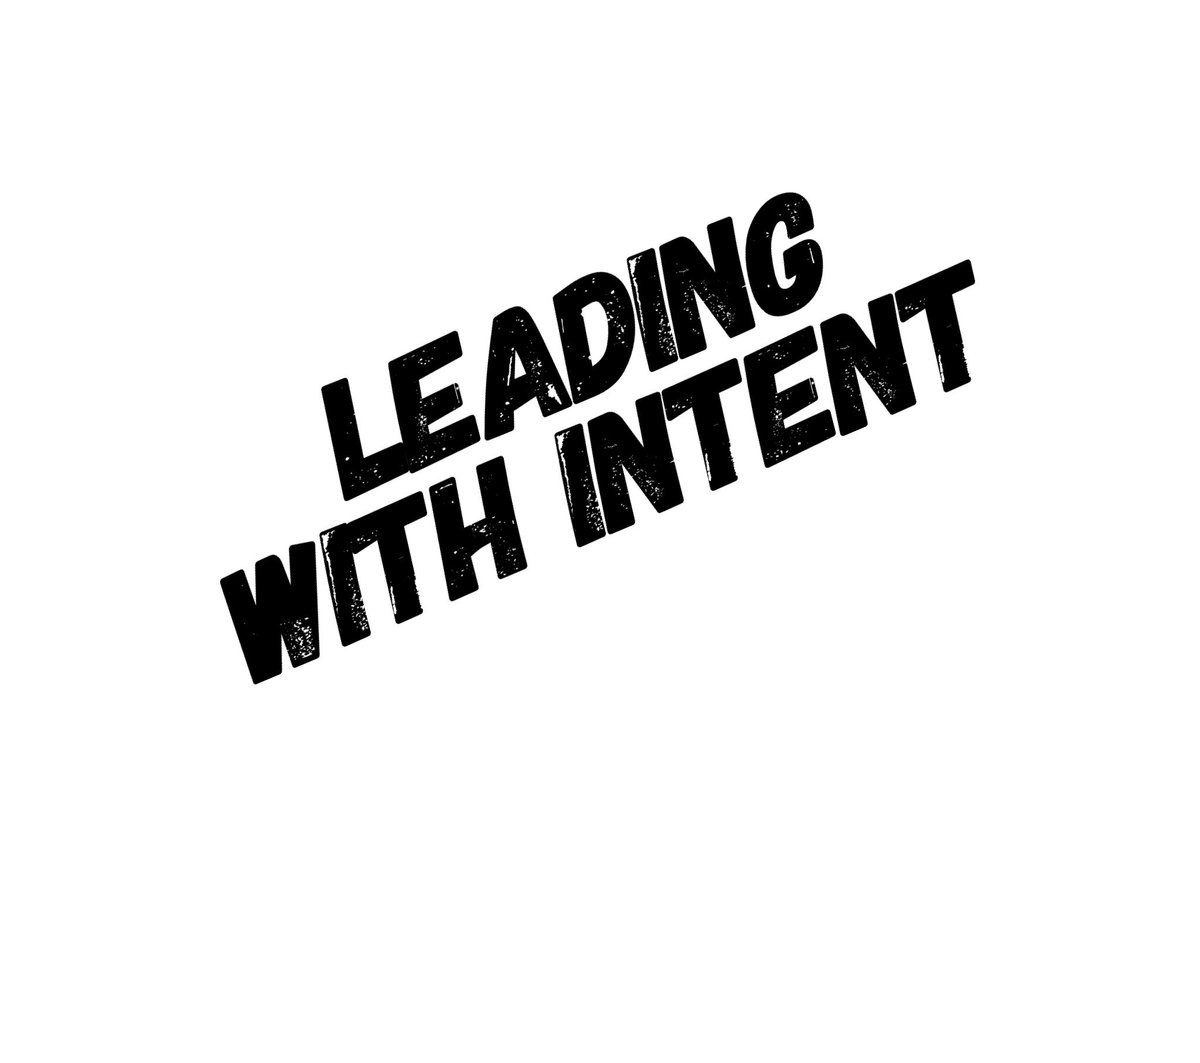 Leading with intent creates a more nurturing environment for your employees. It allows them to better reach their potential
.
.
#empowerment #intent #intentionalactions
.
.